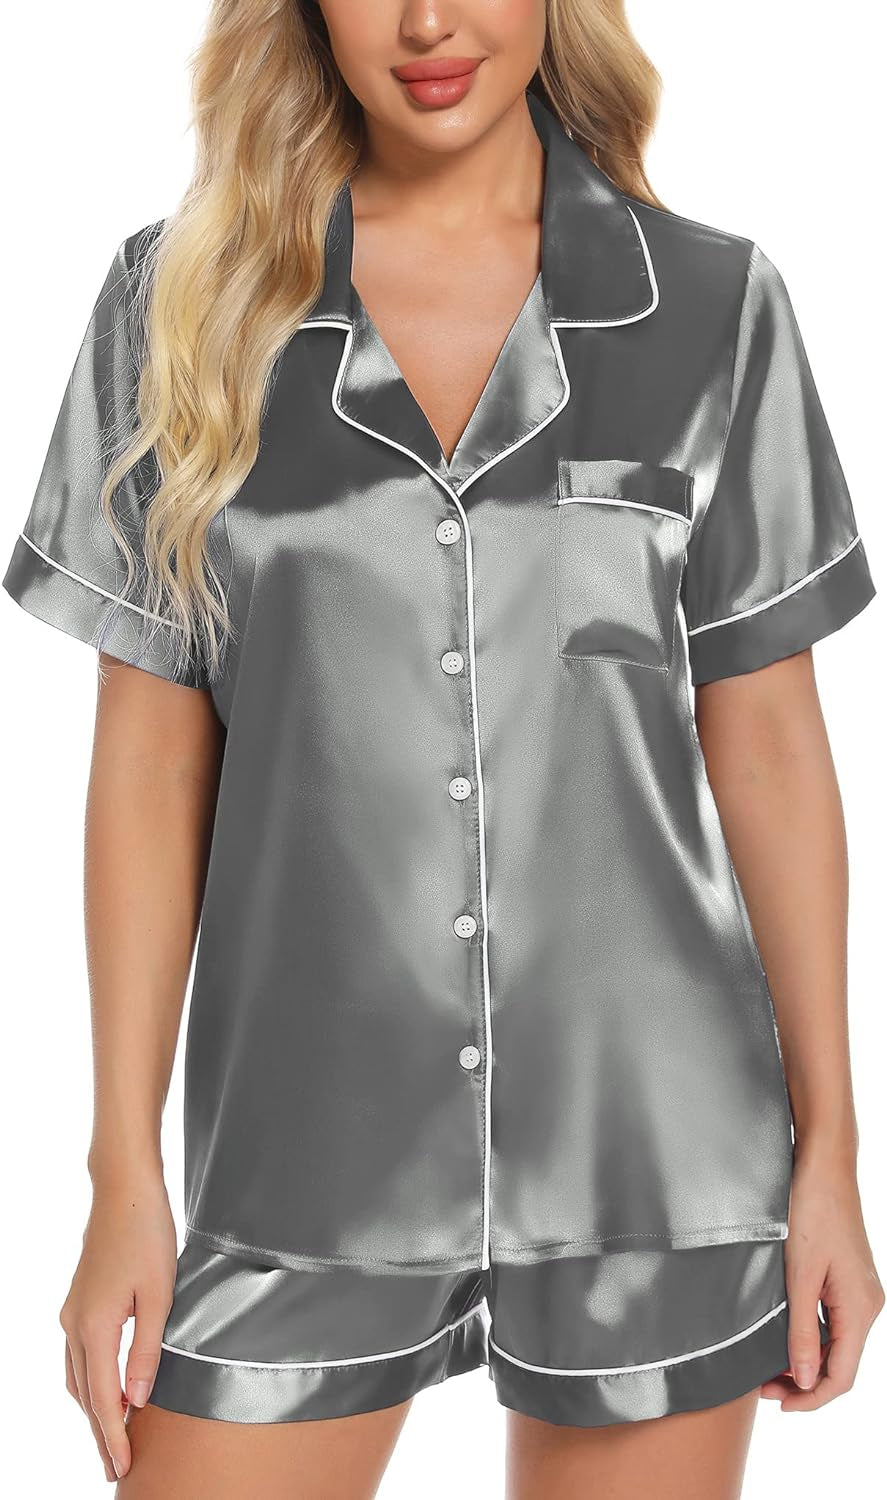 Women's Silk Satin Pajama Set with Short Sleeves, Button Down, and Pockets - S-XXL